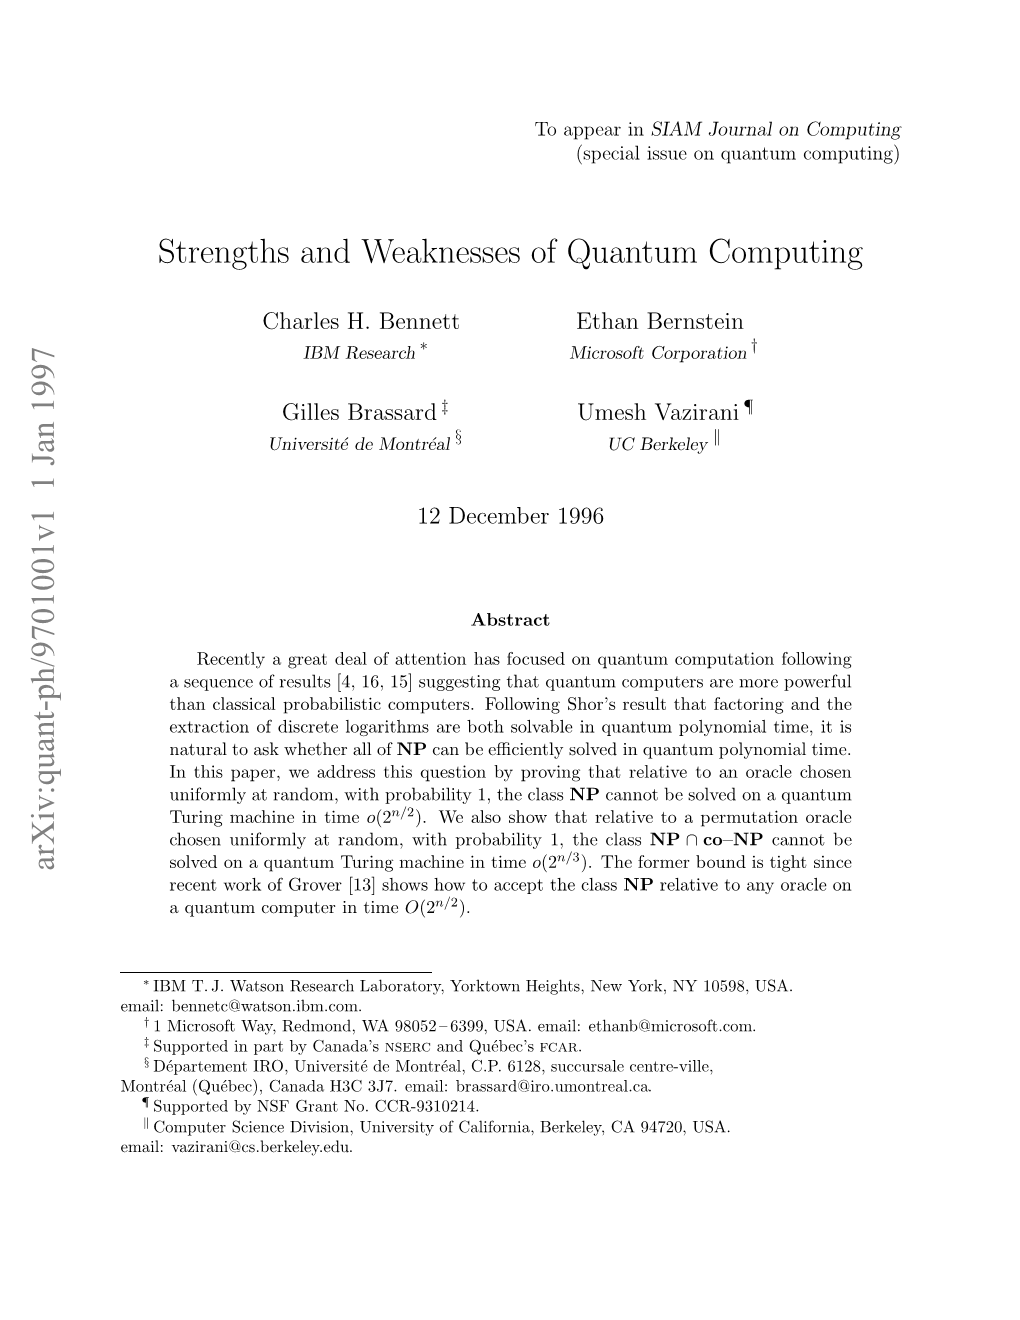 Strengths and Weaknesses of Quantum Computing